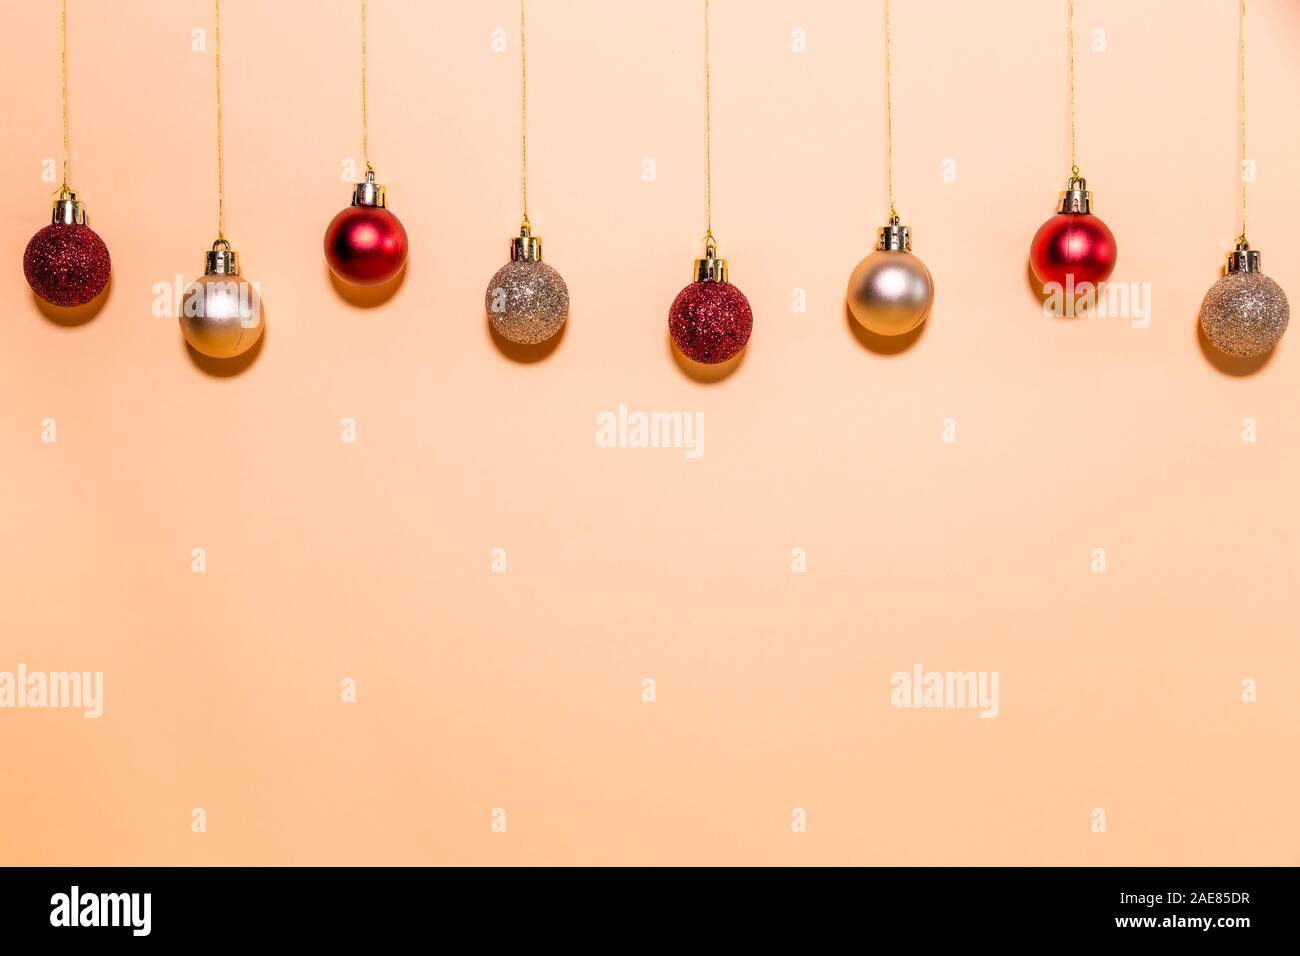 Christmas balls hanging on a beige background. Chistmas concept. Stock Photo